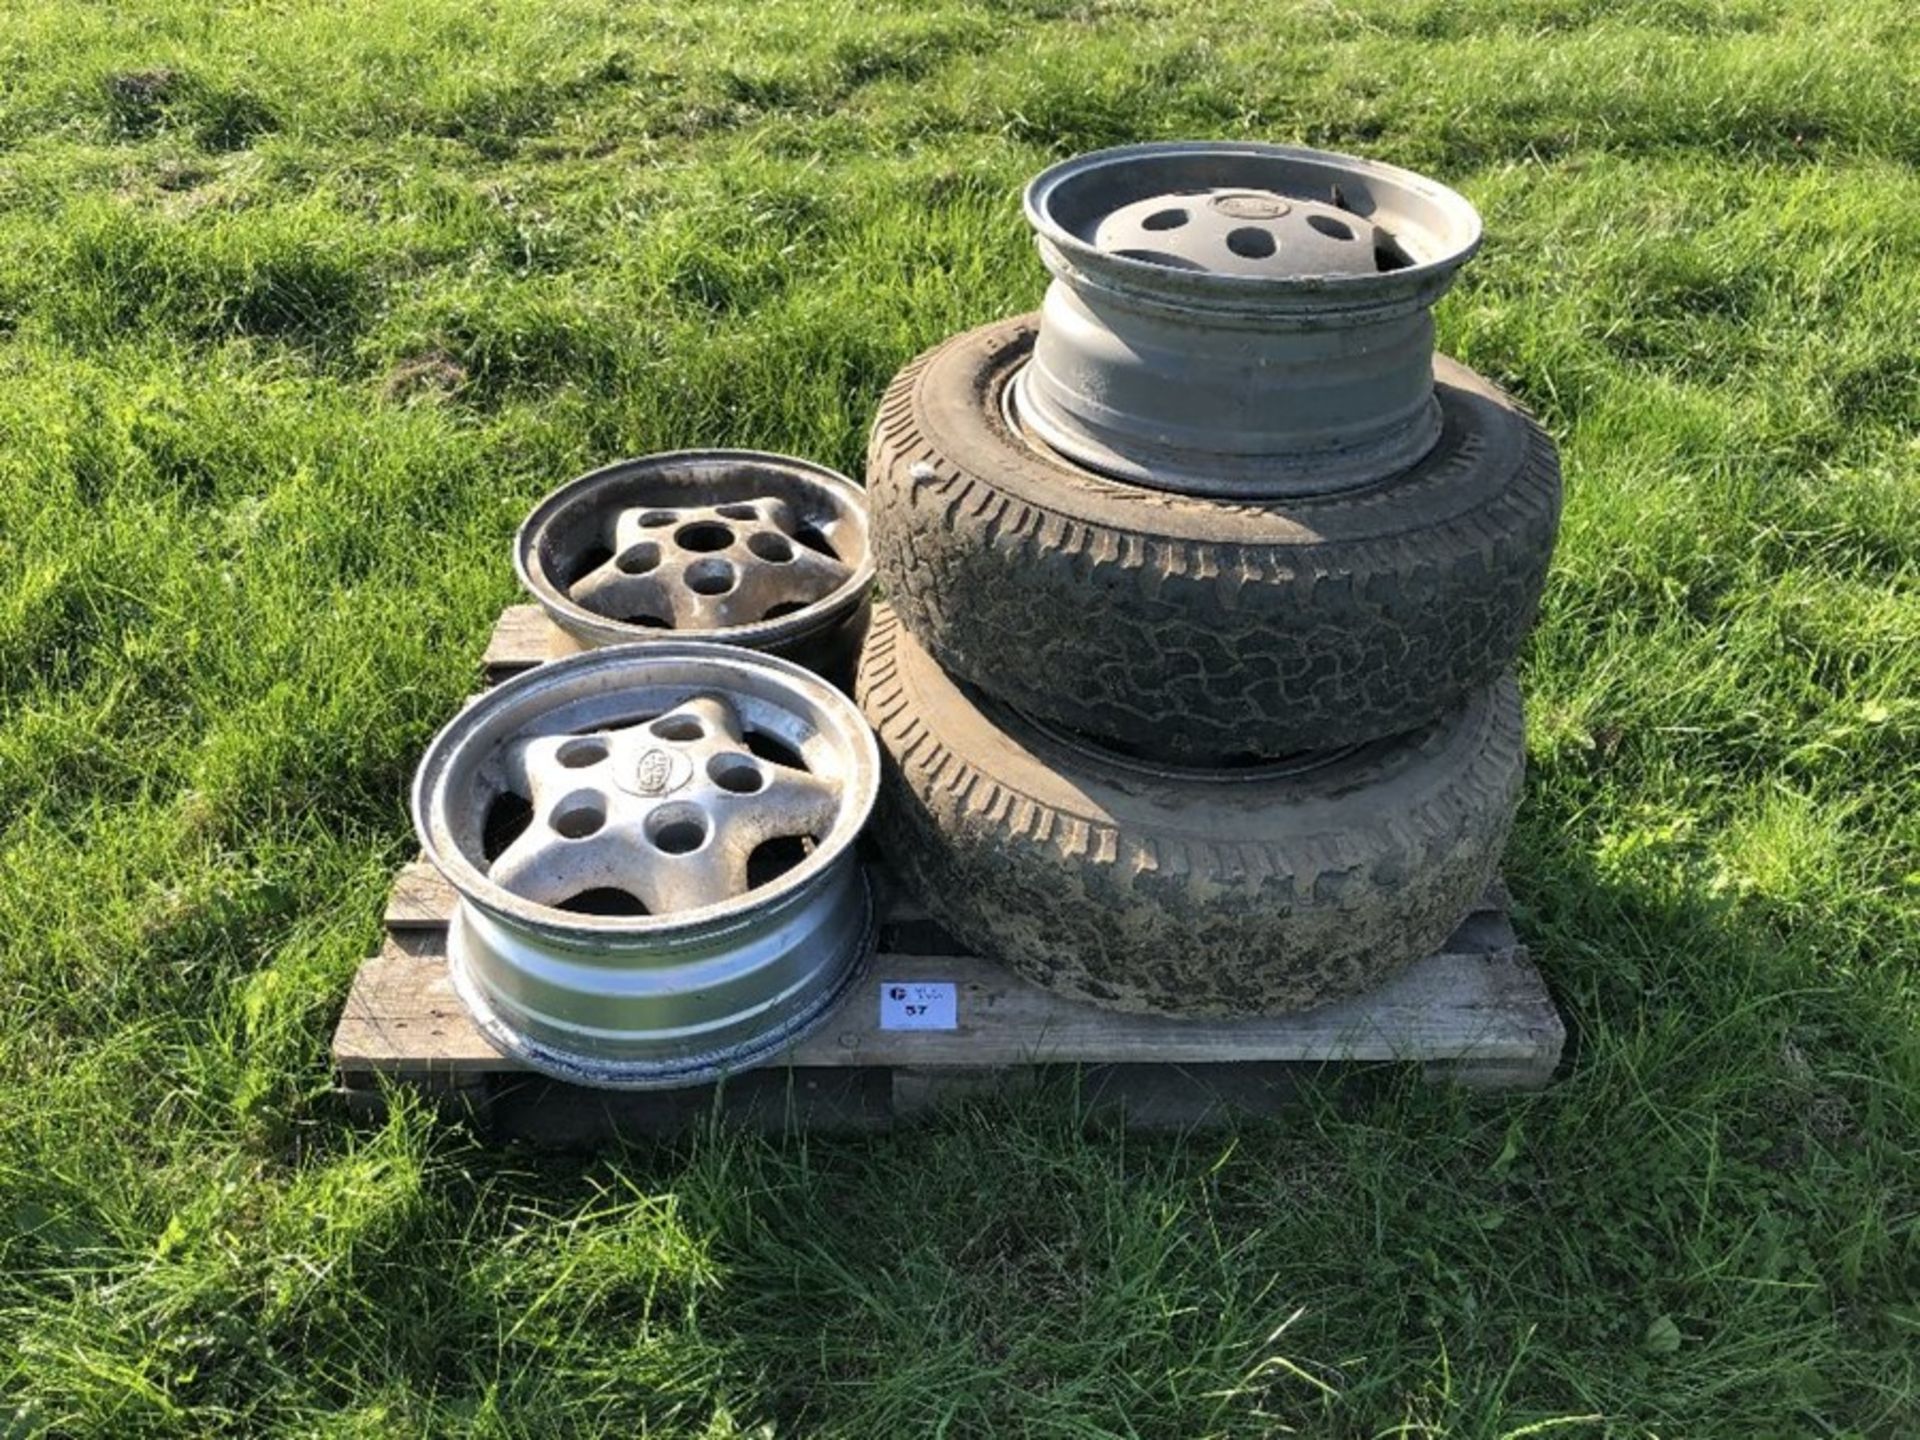 5 x Land Rover Alloy Wheel and 2 x Tyre